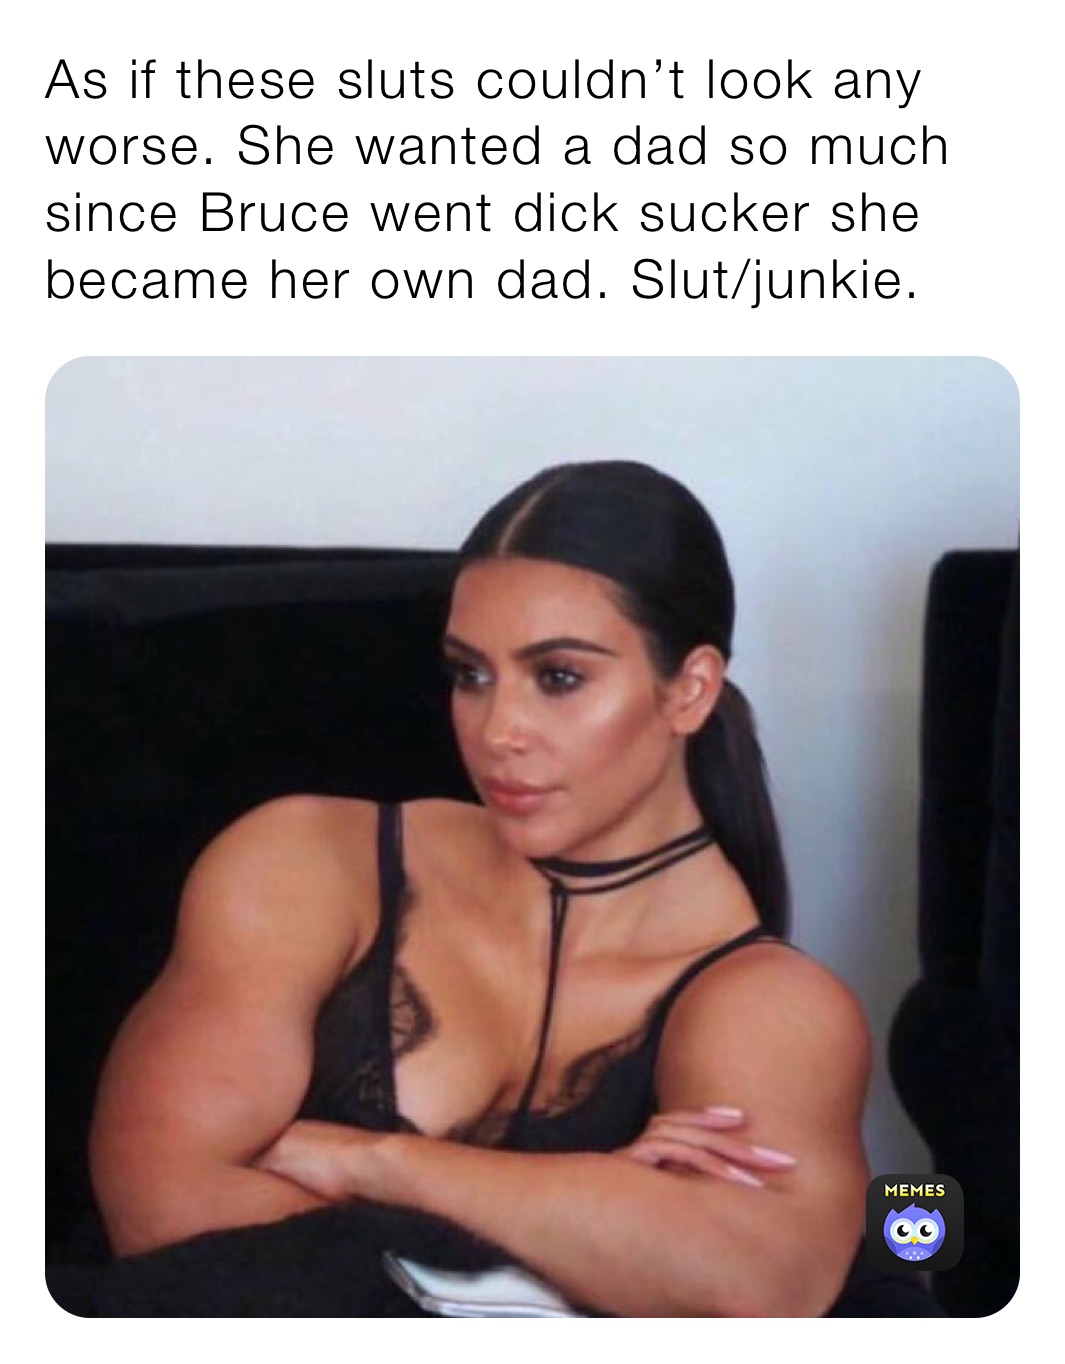 As if these sluts couldn’t look any worse. She wanted a dad so much since Bruce went dick sucker she became her own dad. Slut/junkie.